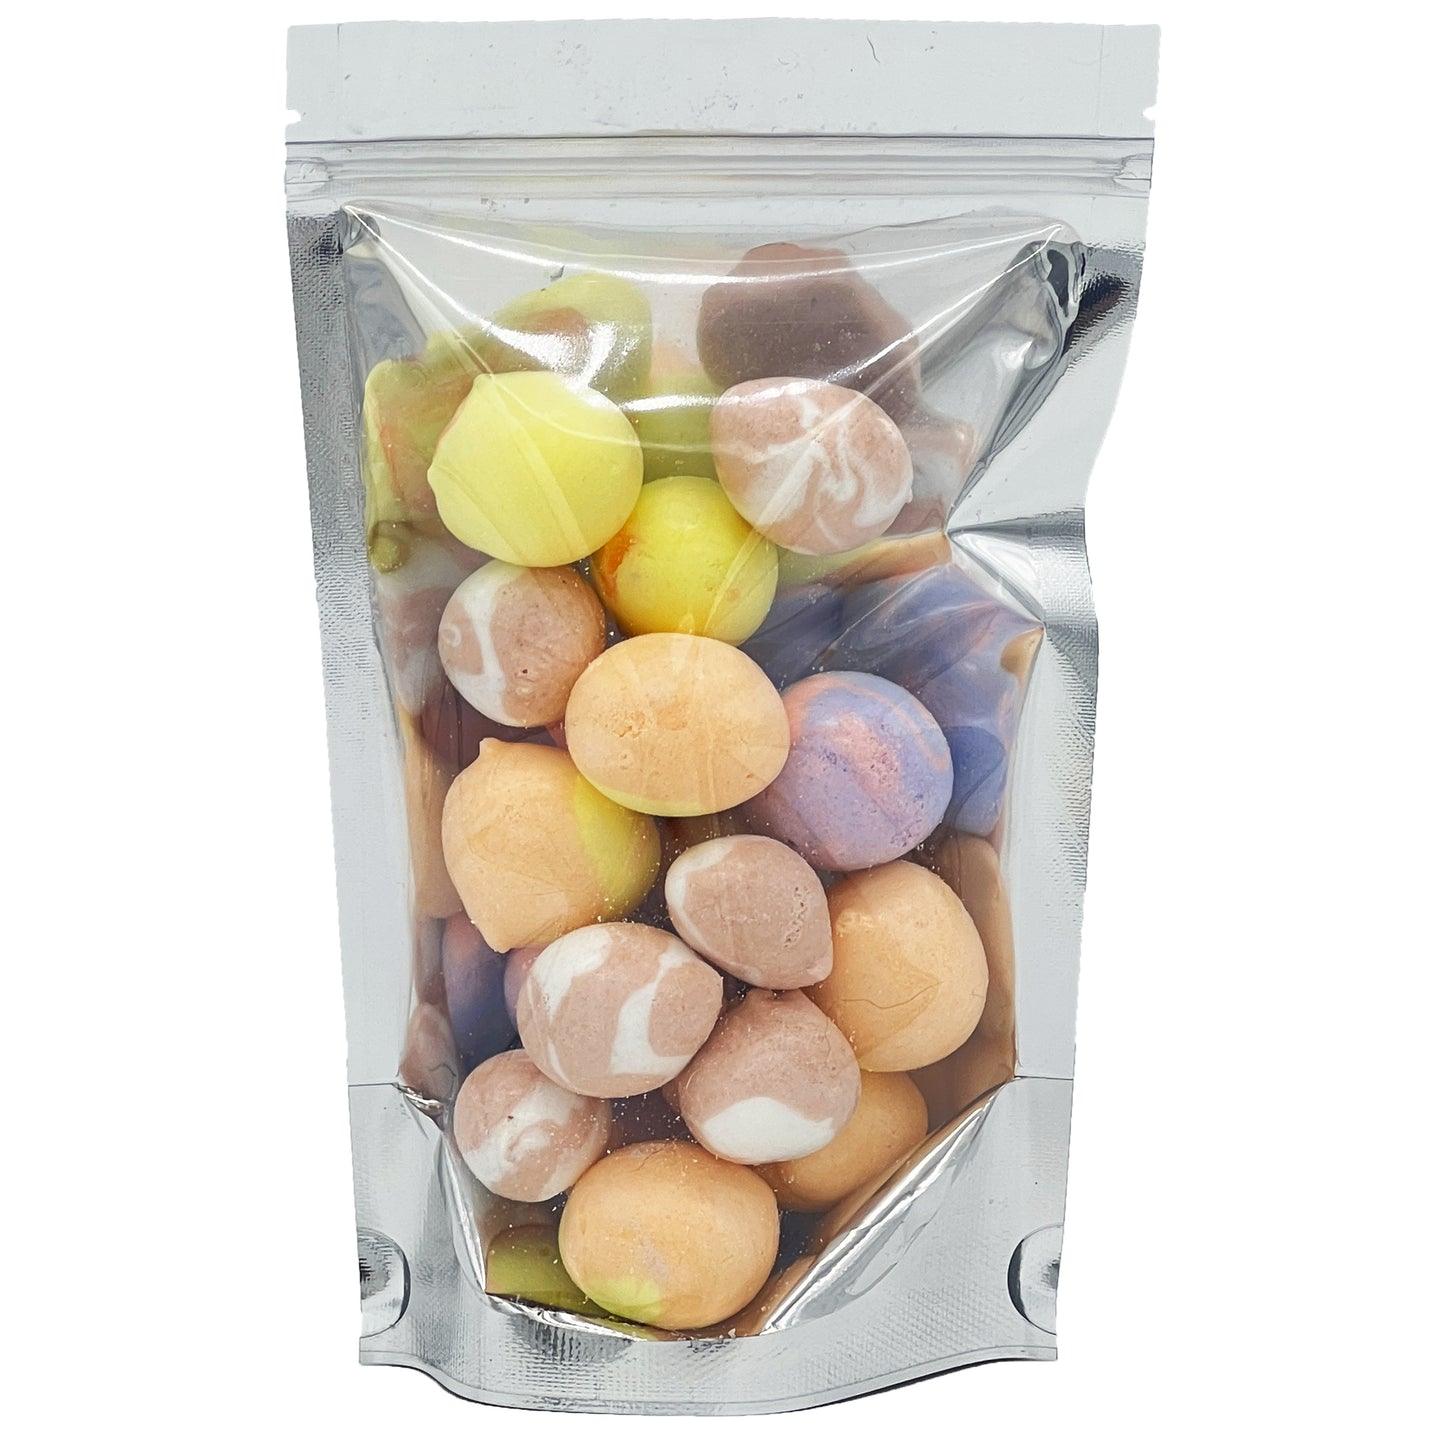 Freeze Dried Candy Tropical Taffy Variety Pack- Crunchy Snack - Space Theme Party Favor Gift Idea